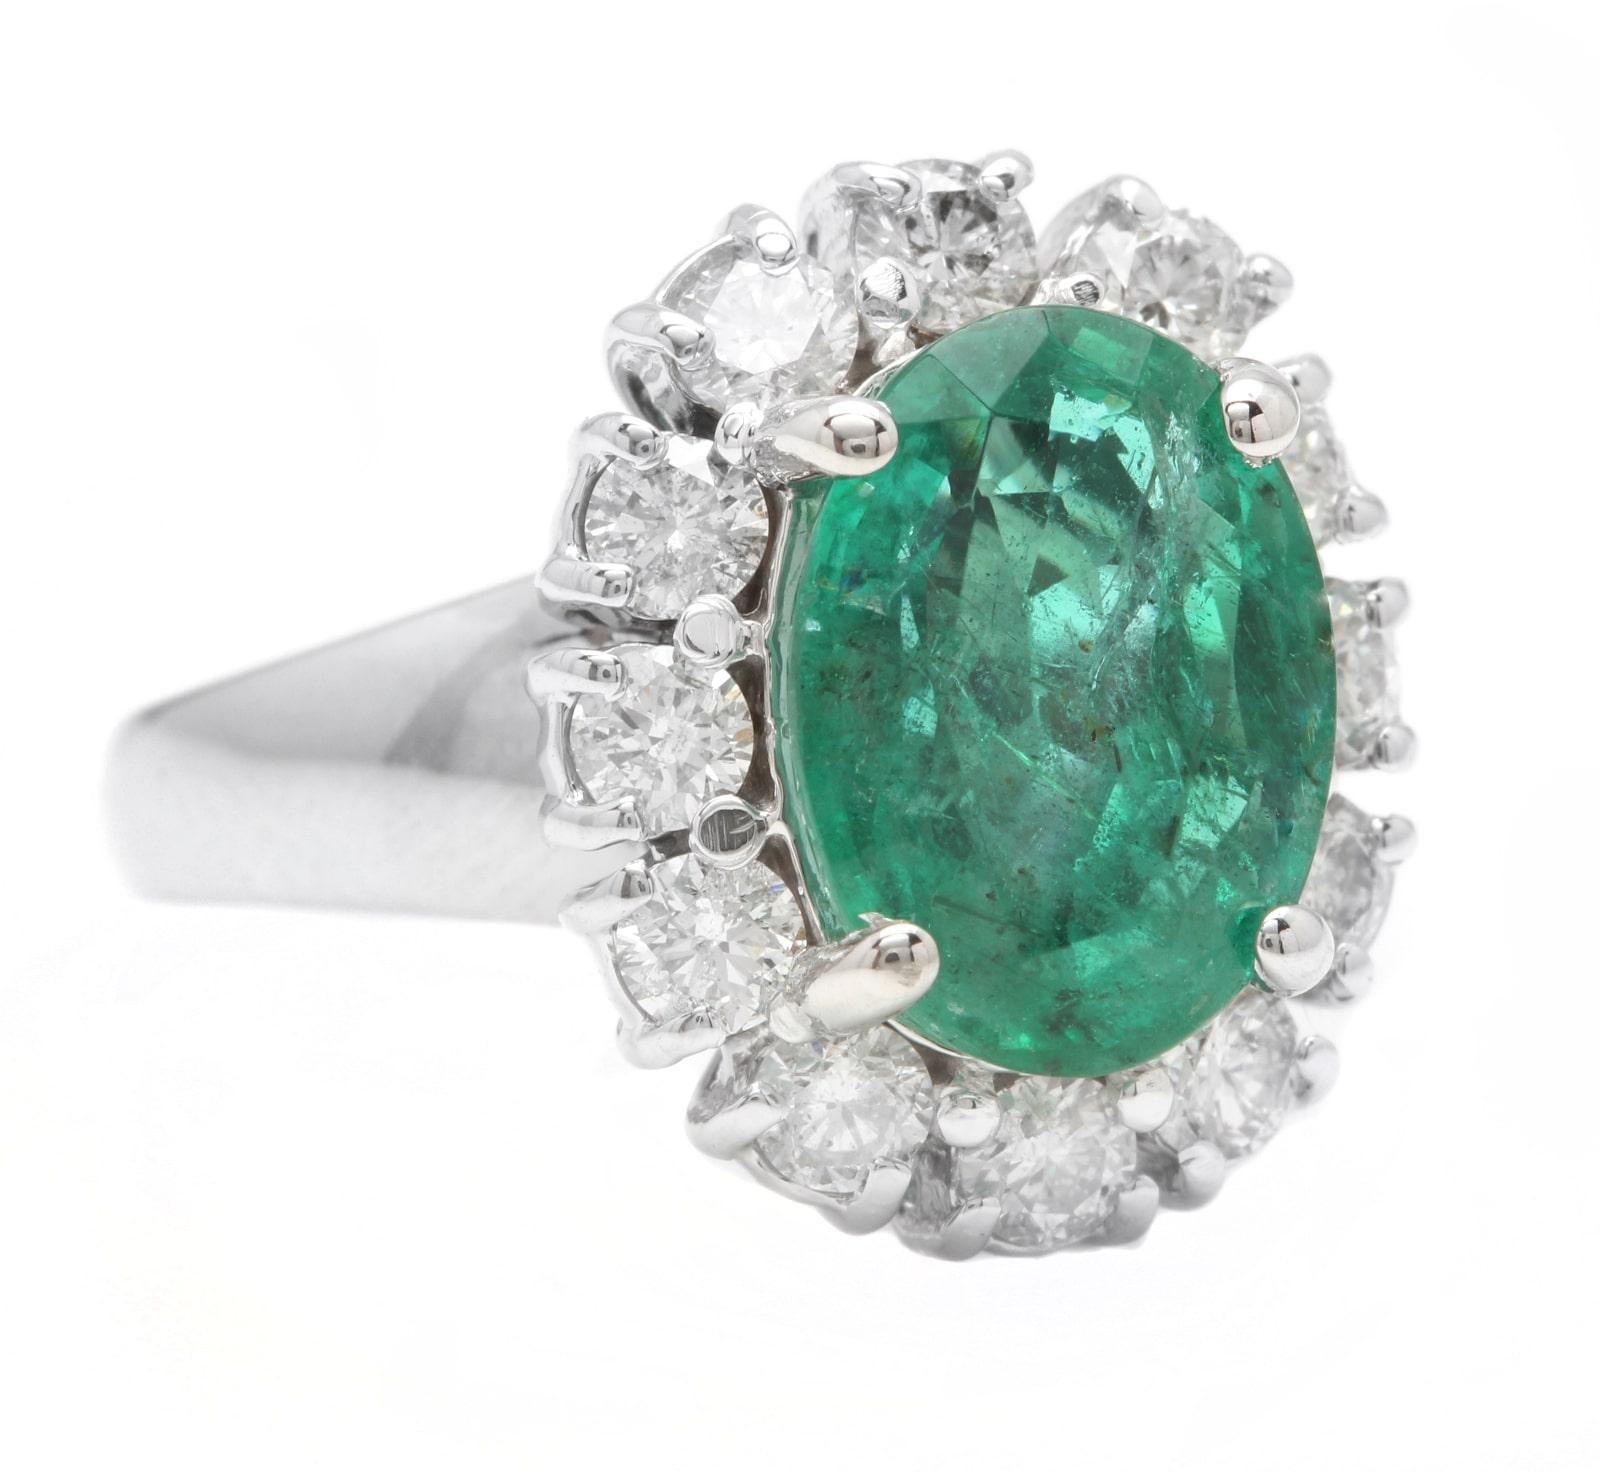 4.60 Carats Natural Emerald and Diamond 14K Solid White Gold Ring

Suggested Replacement Value: $7,800.00

Total Natural Green Emerald Weight is: Approx. 3.50 Carats (transparent)

Emerald Treatment: Oiling  

Emerald Measures: 11 x 9mm

Natural